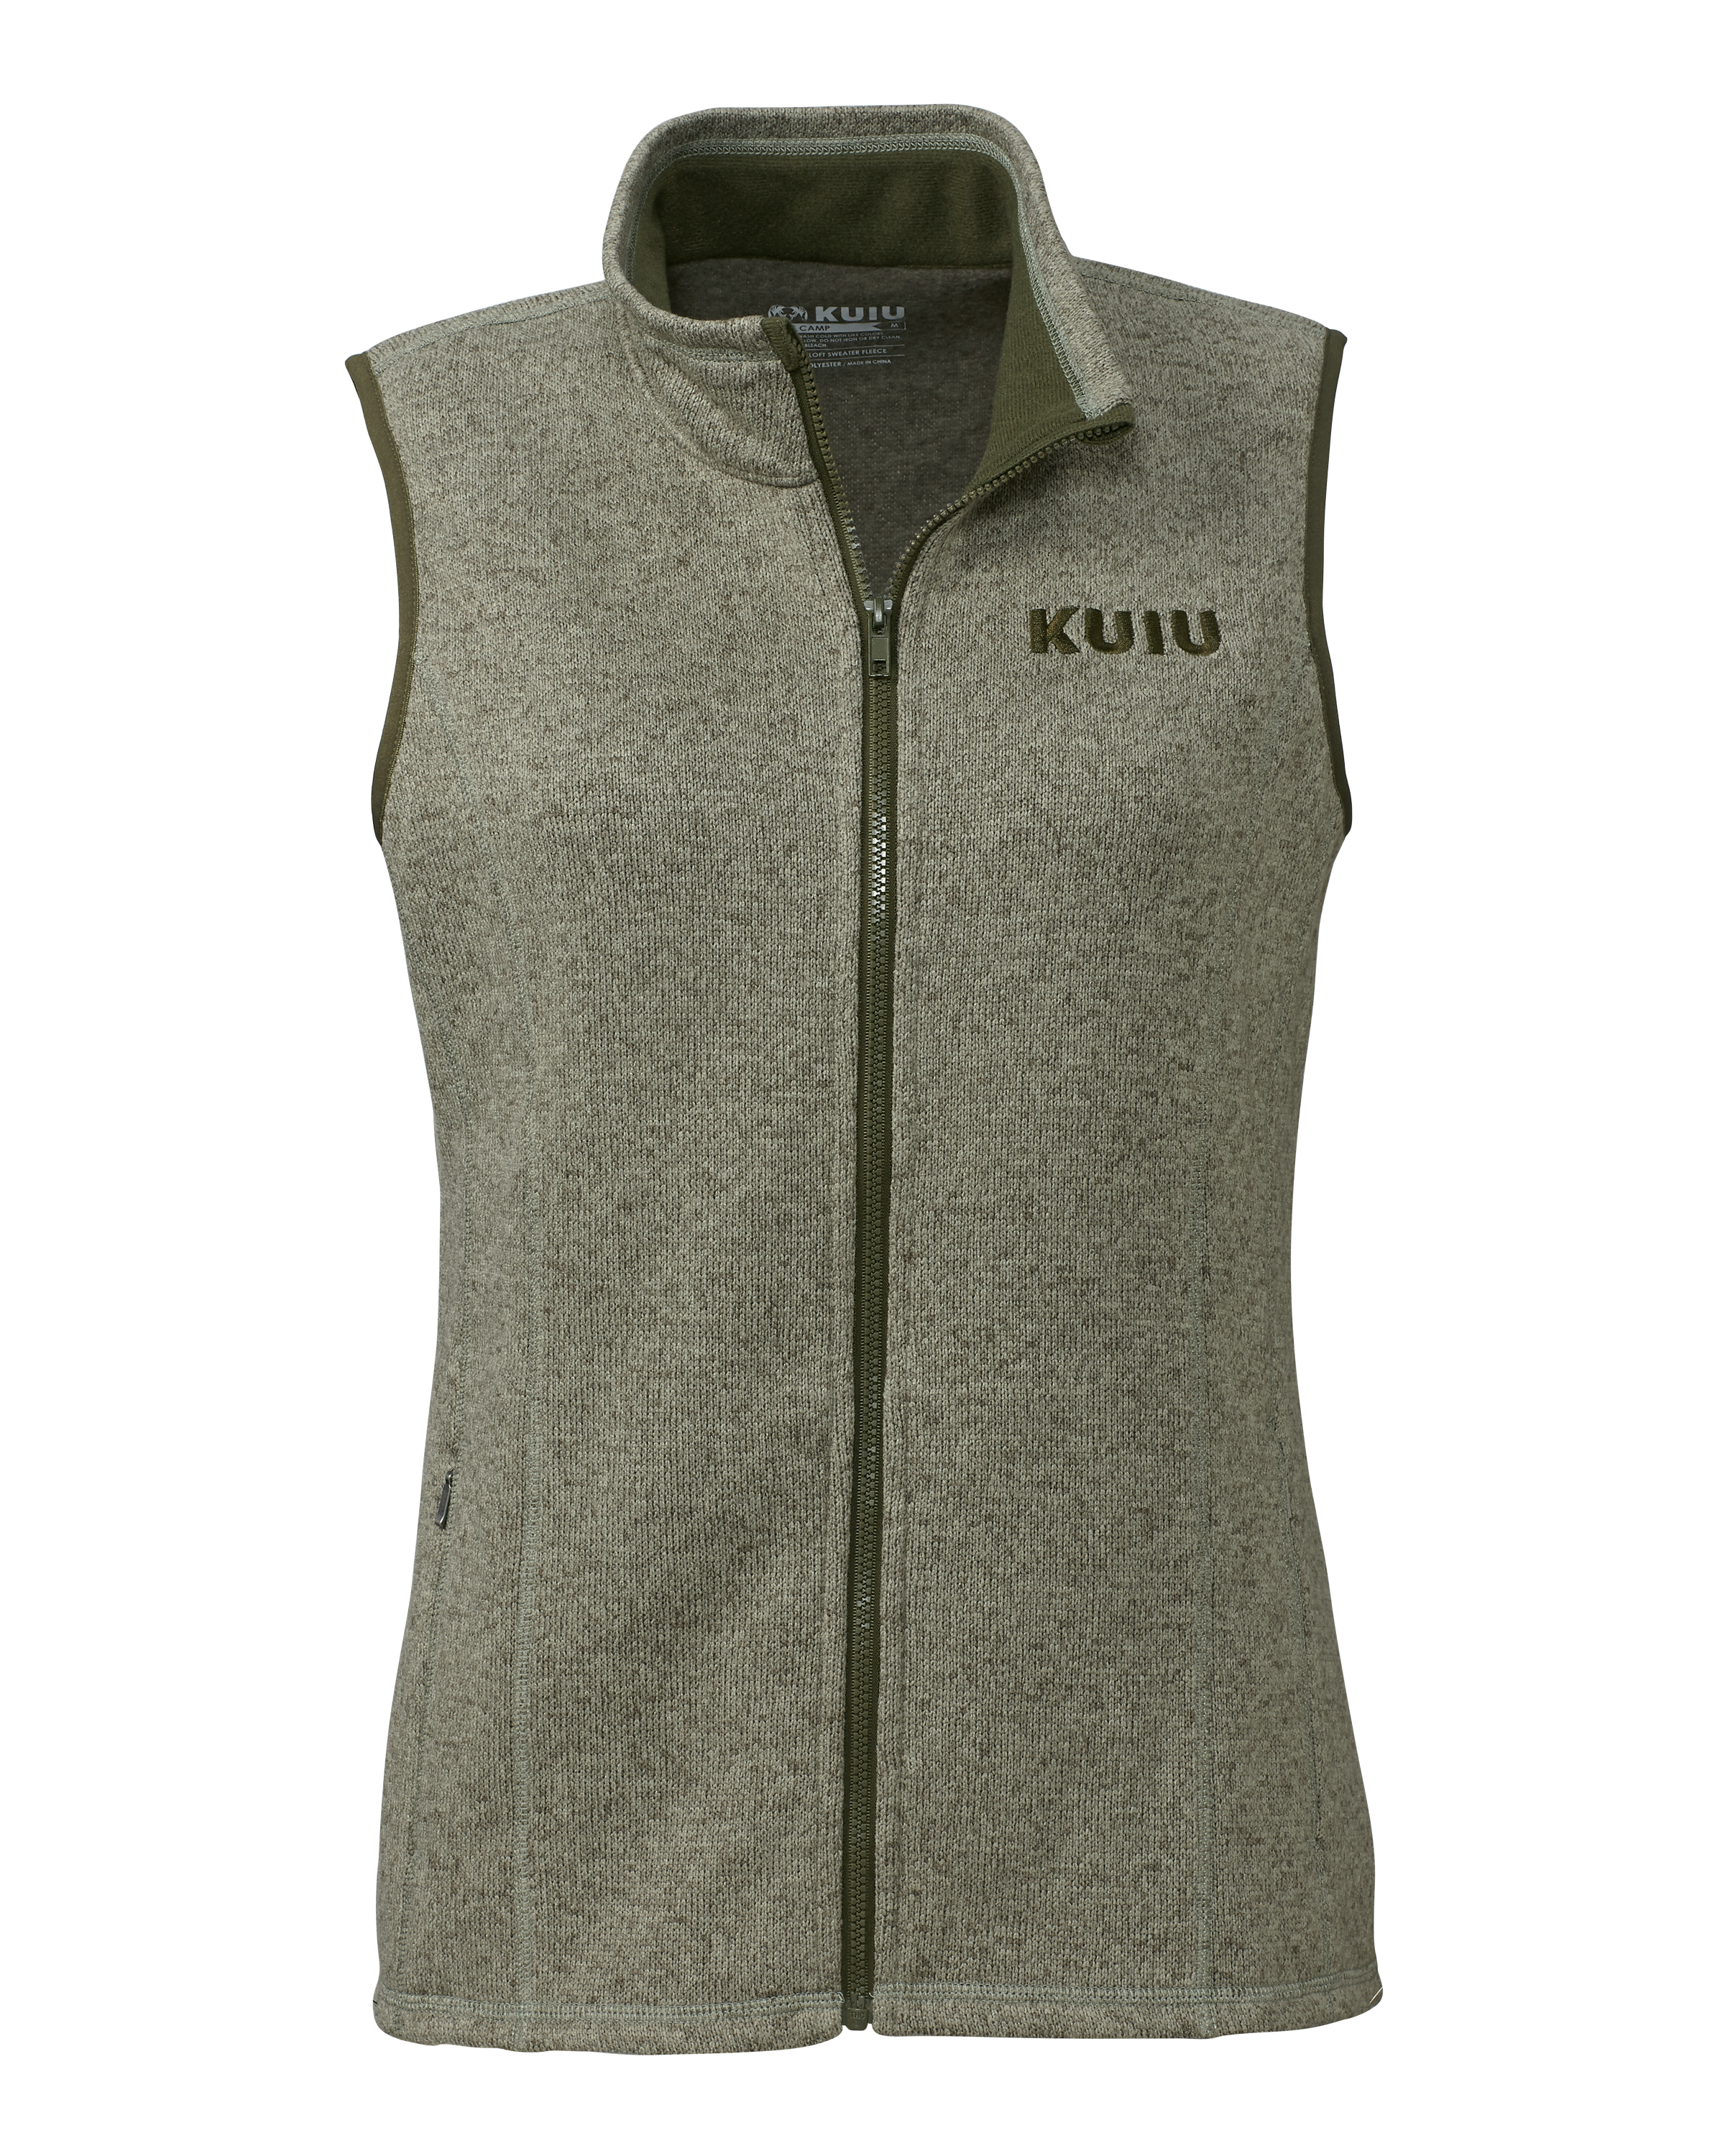 KUIU Outlet Women's Base Camp Sweater Vest in Heather Olive | Size XS